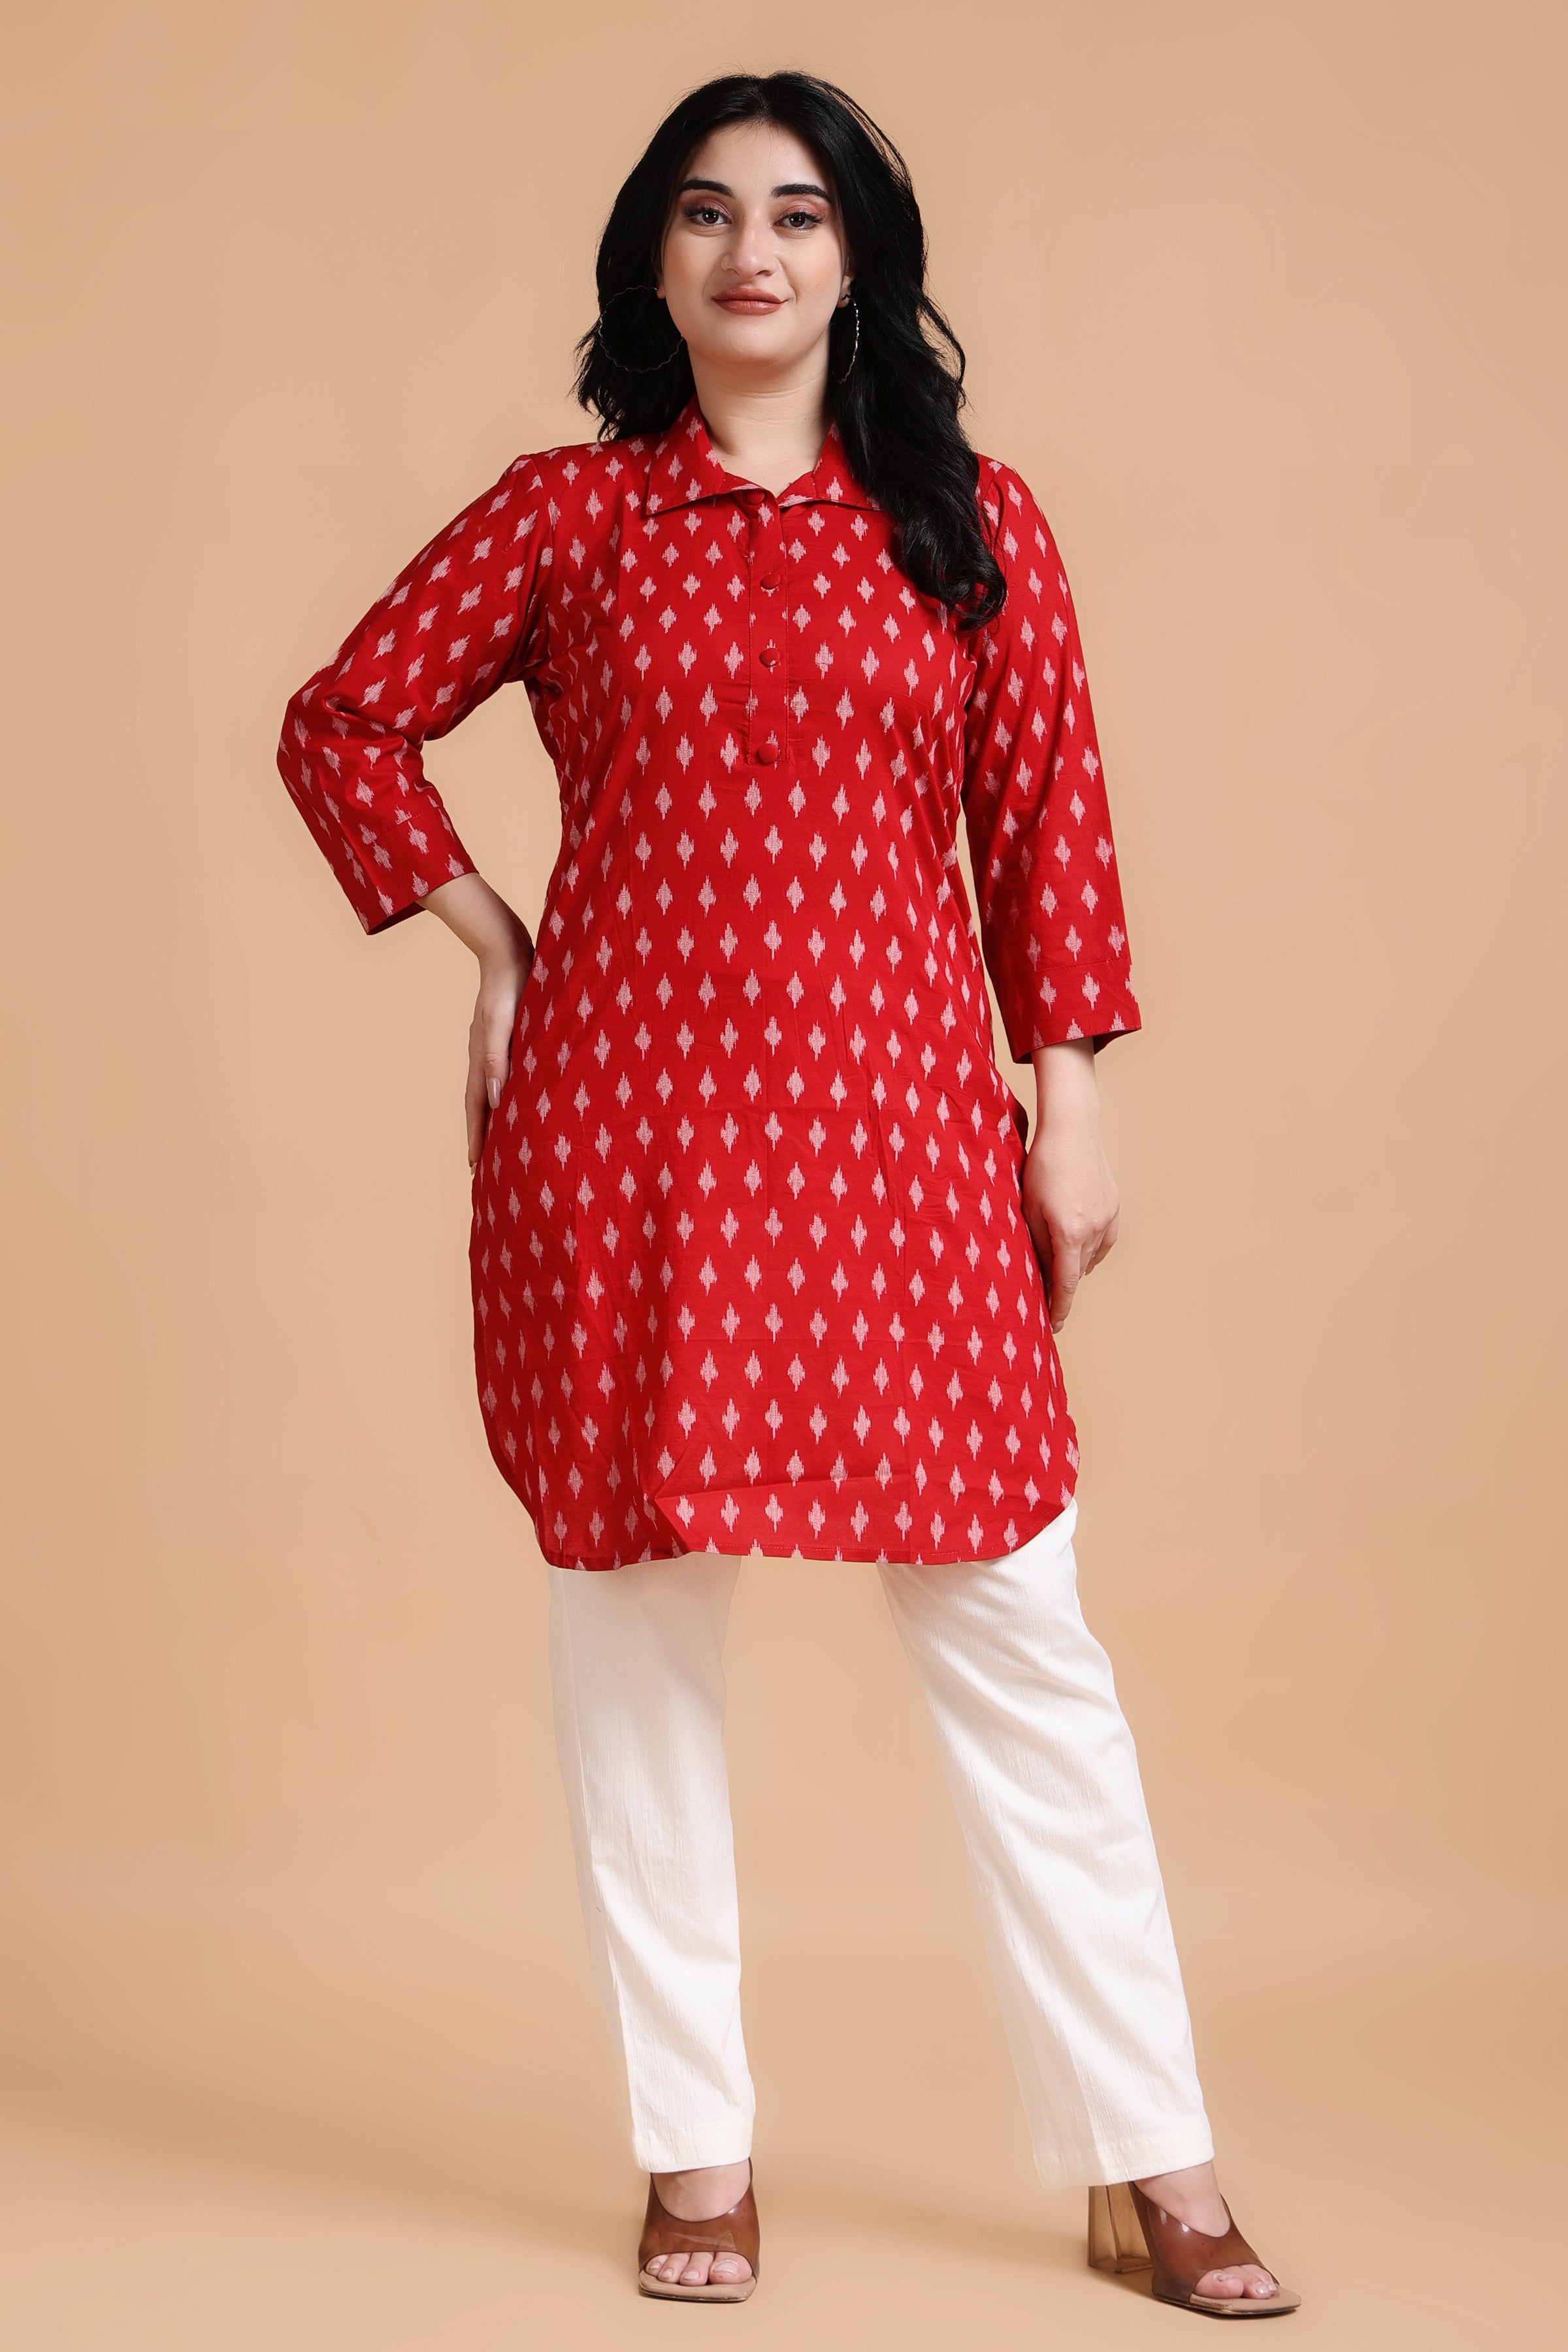 Buy Lawn Cotton Rouge Red Printed Kurti(XXL-04) at Amazon.in